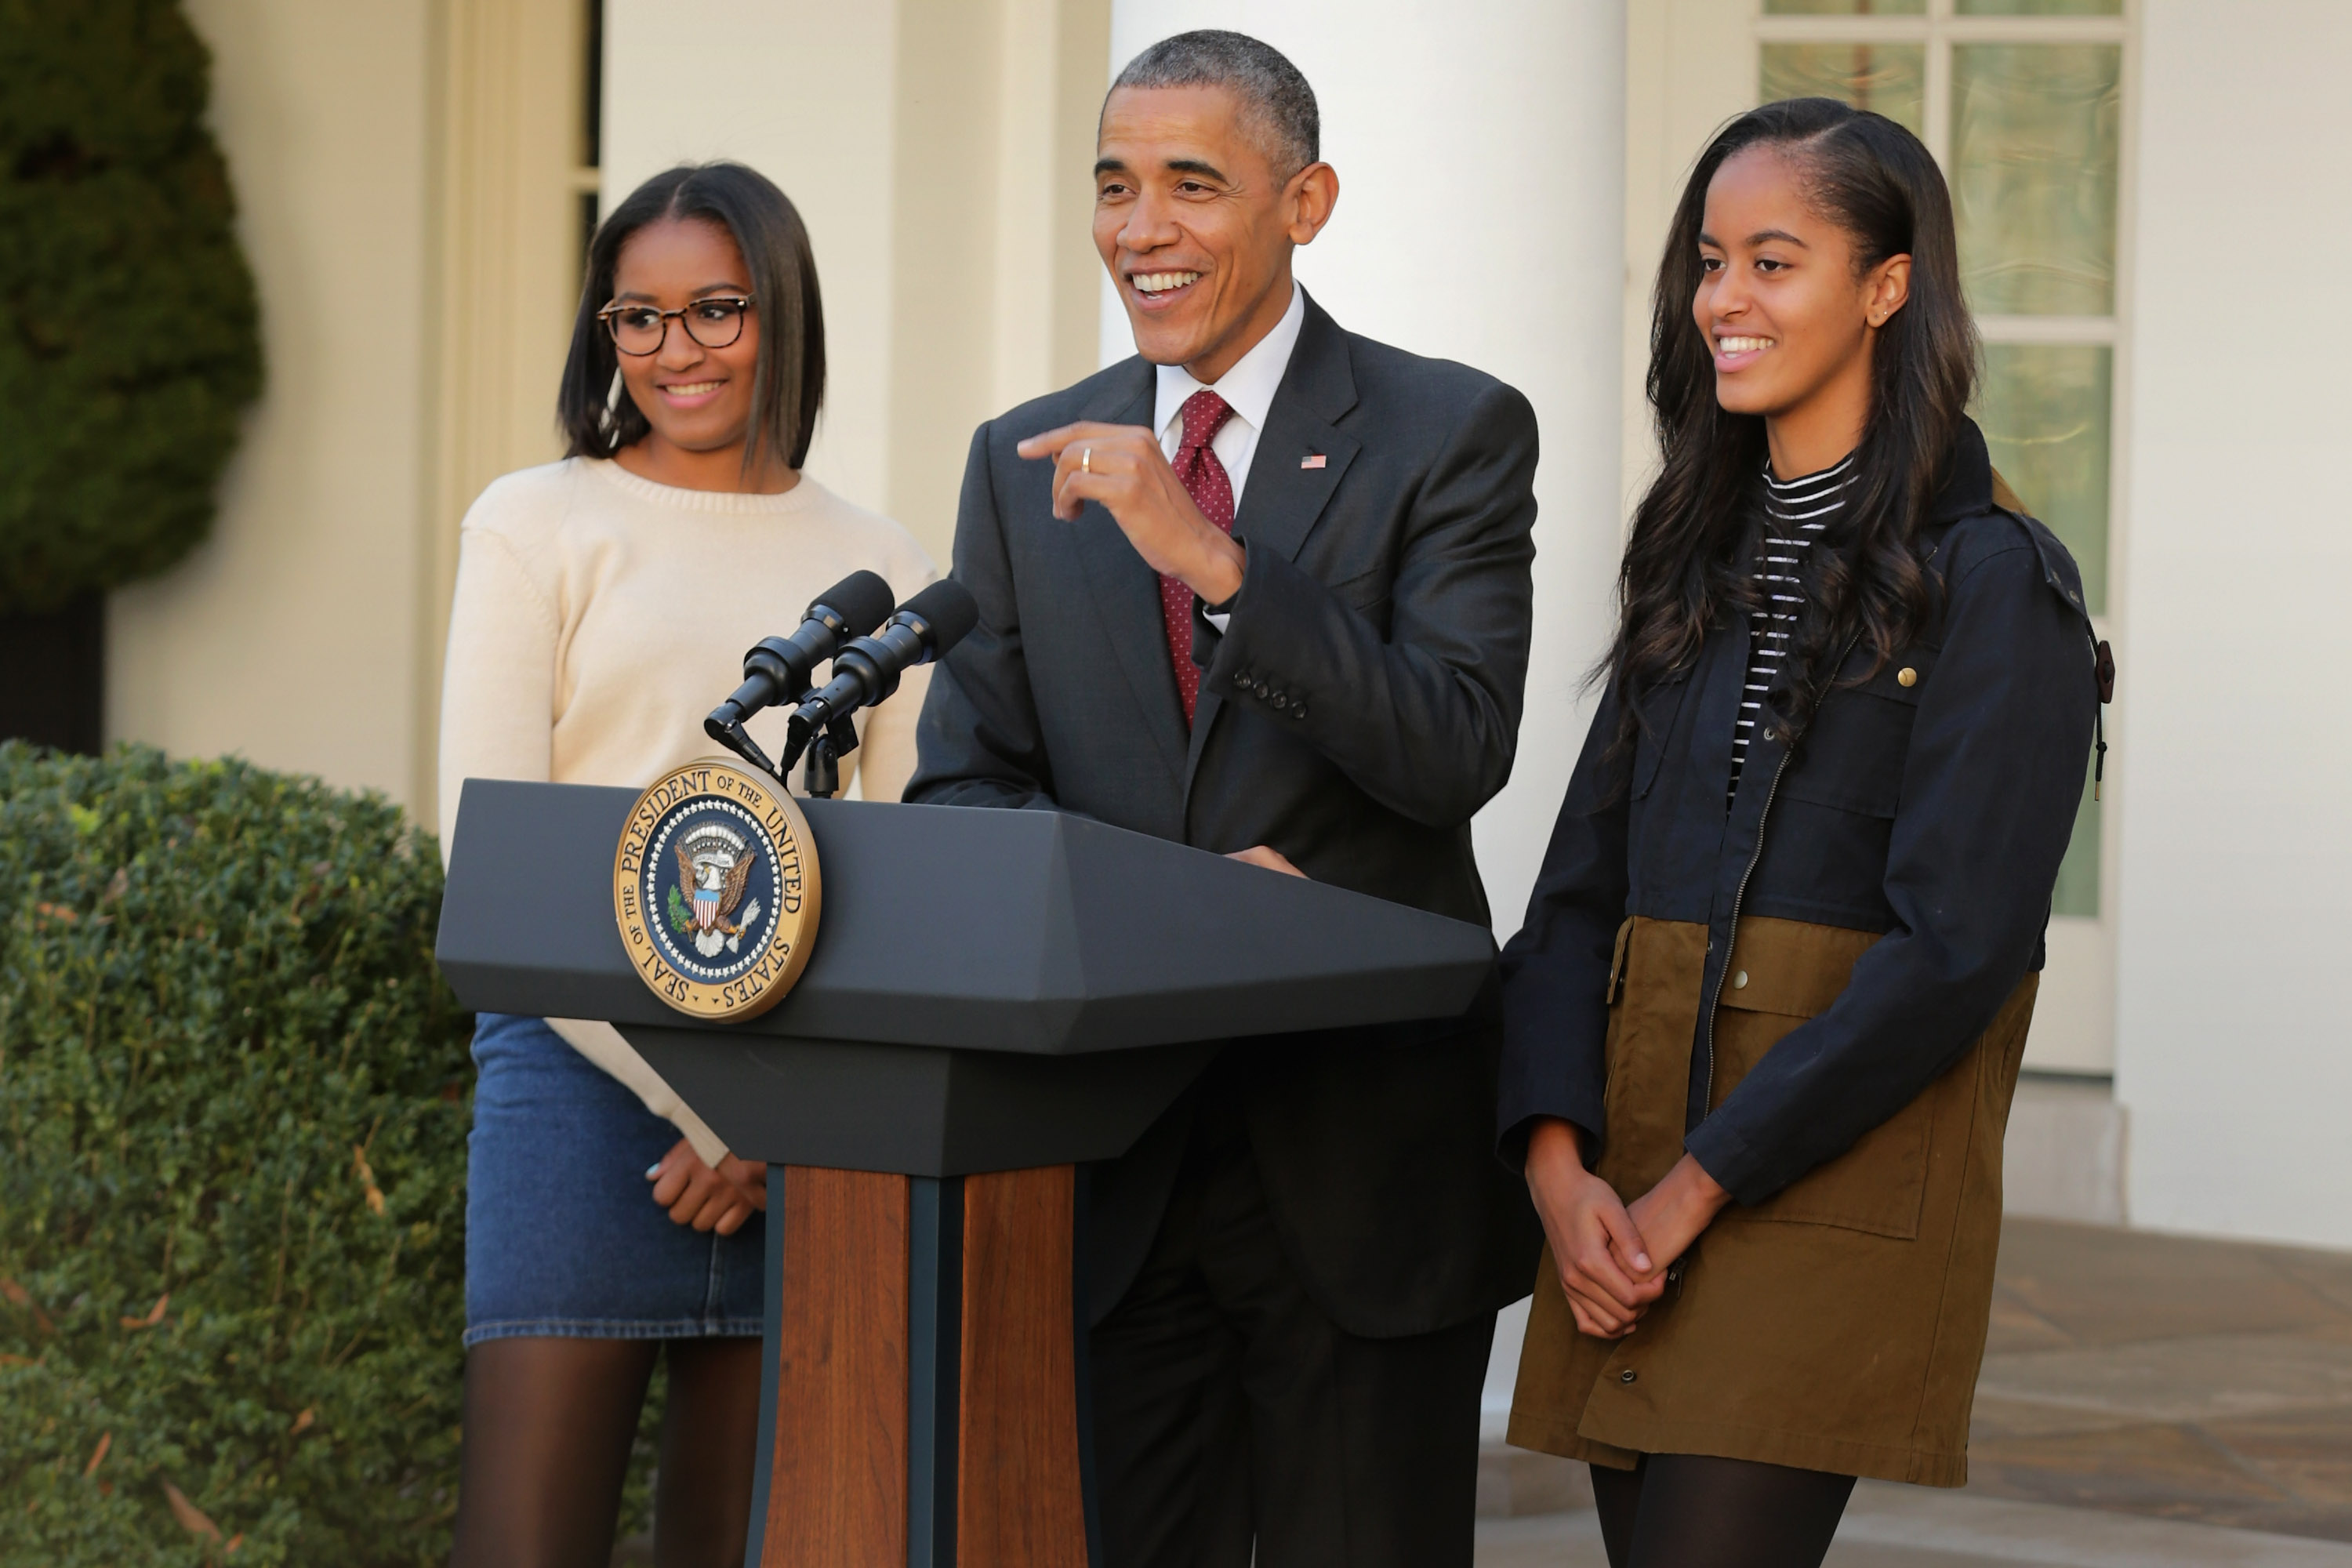 WASHINGTON, DC - NOVEMBER 25:  U.S. President Barack Obama delivers remarks with his daughters Sasha (L) and Malia during the annual turkey pardoning ceremony in the Rose Garden at the White House  November 25, 2015 in Washington, DC. In a tradition dating back to 1947, the president pardons a turkey, sparing the tom -- and his alternate -- from becoming a Thanksgiving Day feast. This year, Americans were asked to choose which of two turkeys would be pardoned and to cast their votes on Twitter.  (Photo by Chip Somodevilla/Getty Images) (Chip Somodevilla/Getty Images)